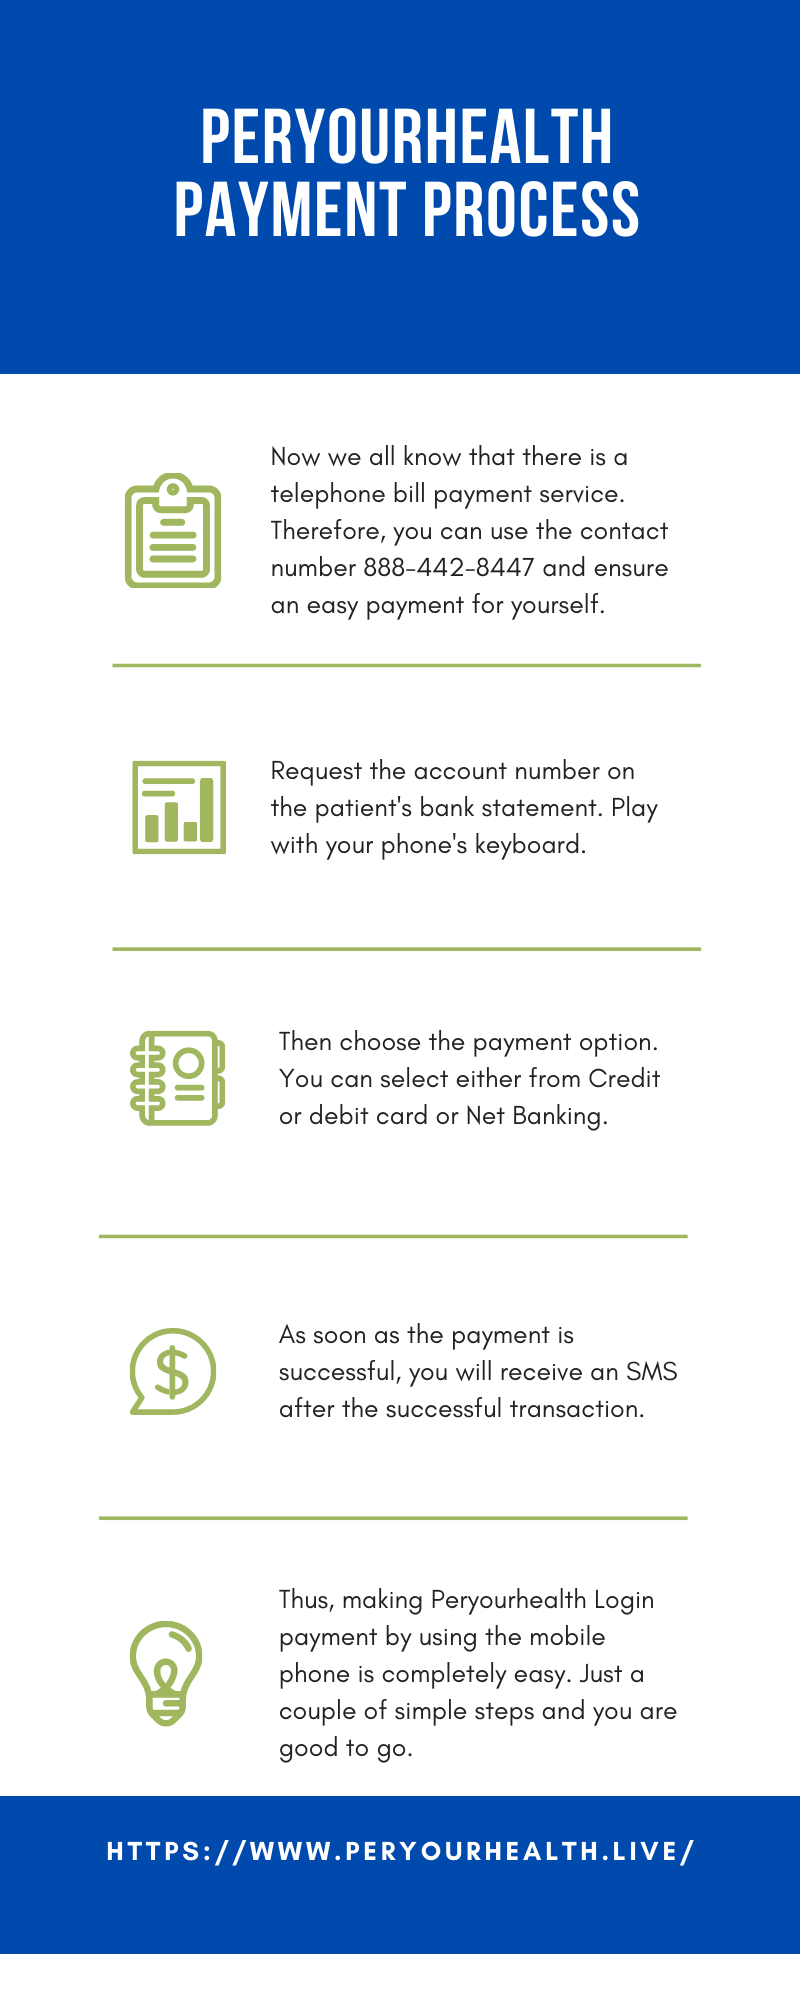 Peryourhealth Payment Process